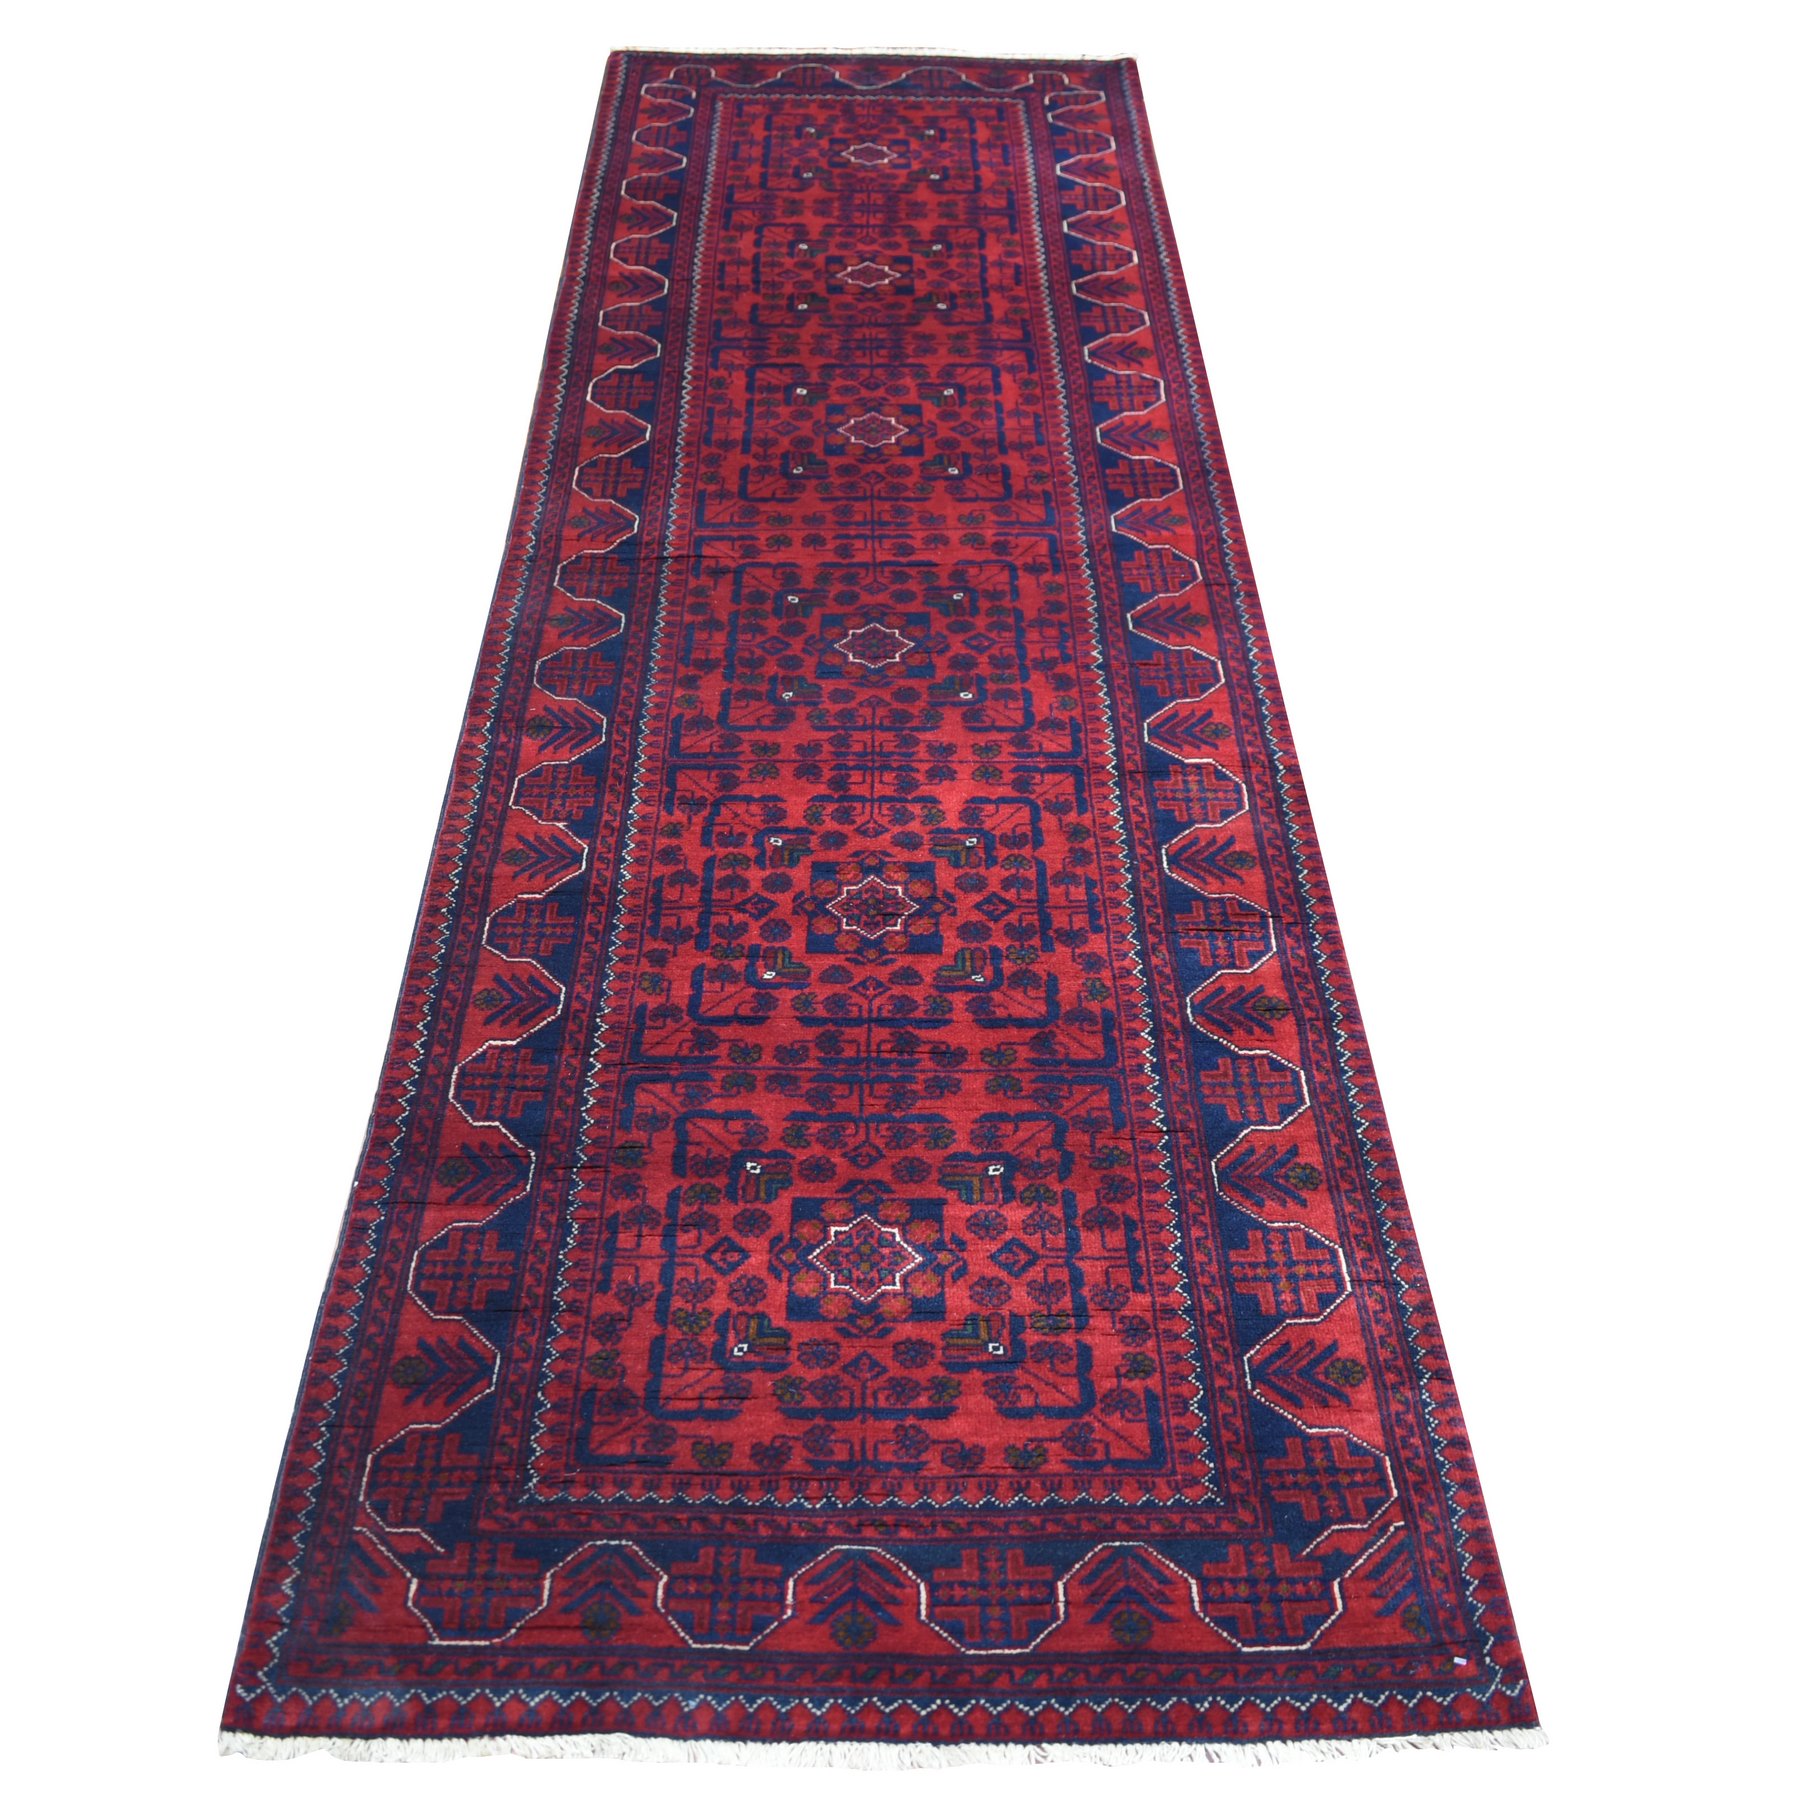 2'10"x9'4" Deep and Saturated Red With Geometric Design Hand Woven Afghan Khamyab, Velvety Wool Runner Oriental Rug 